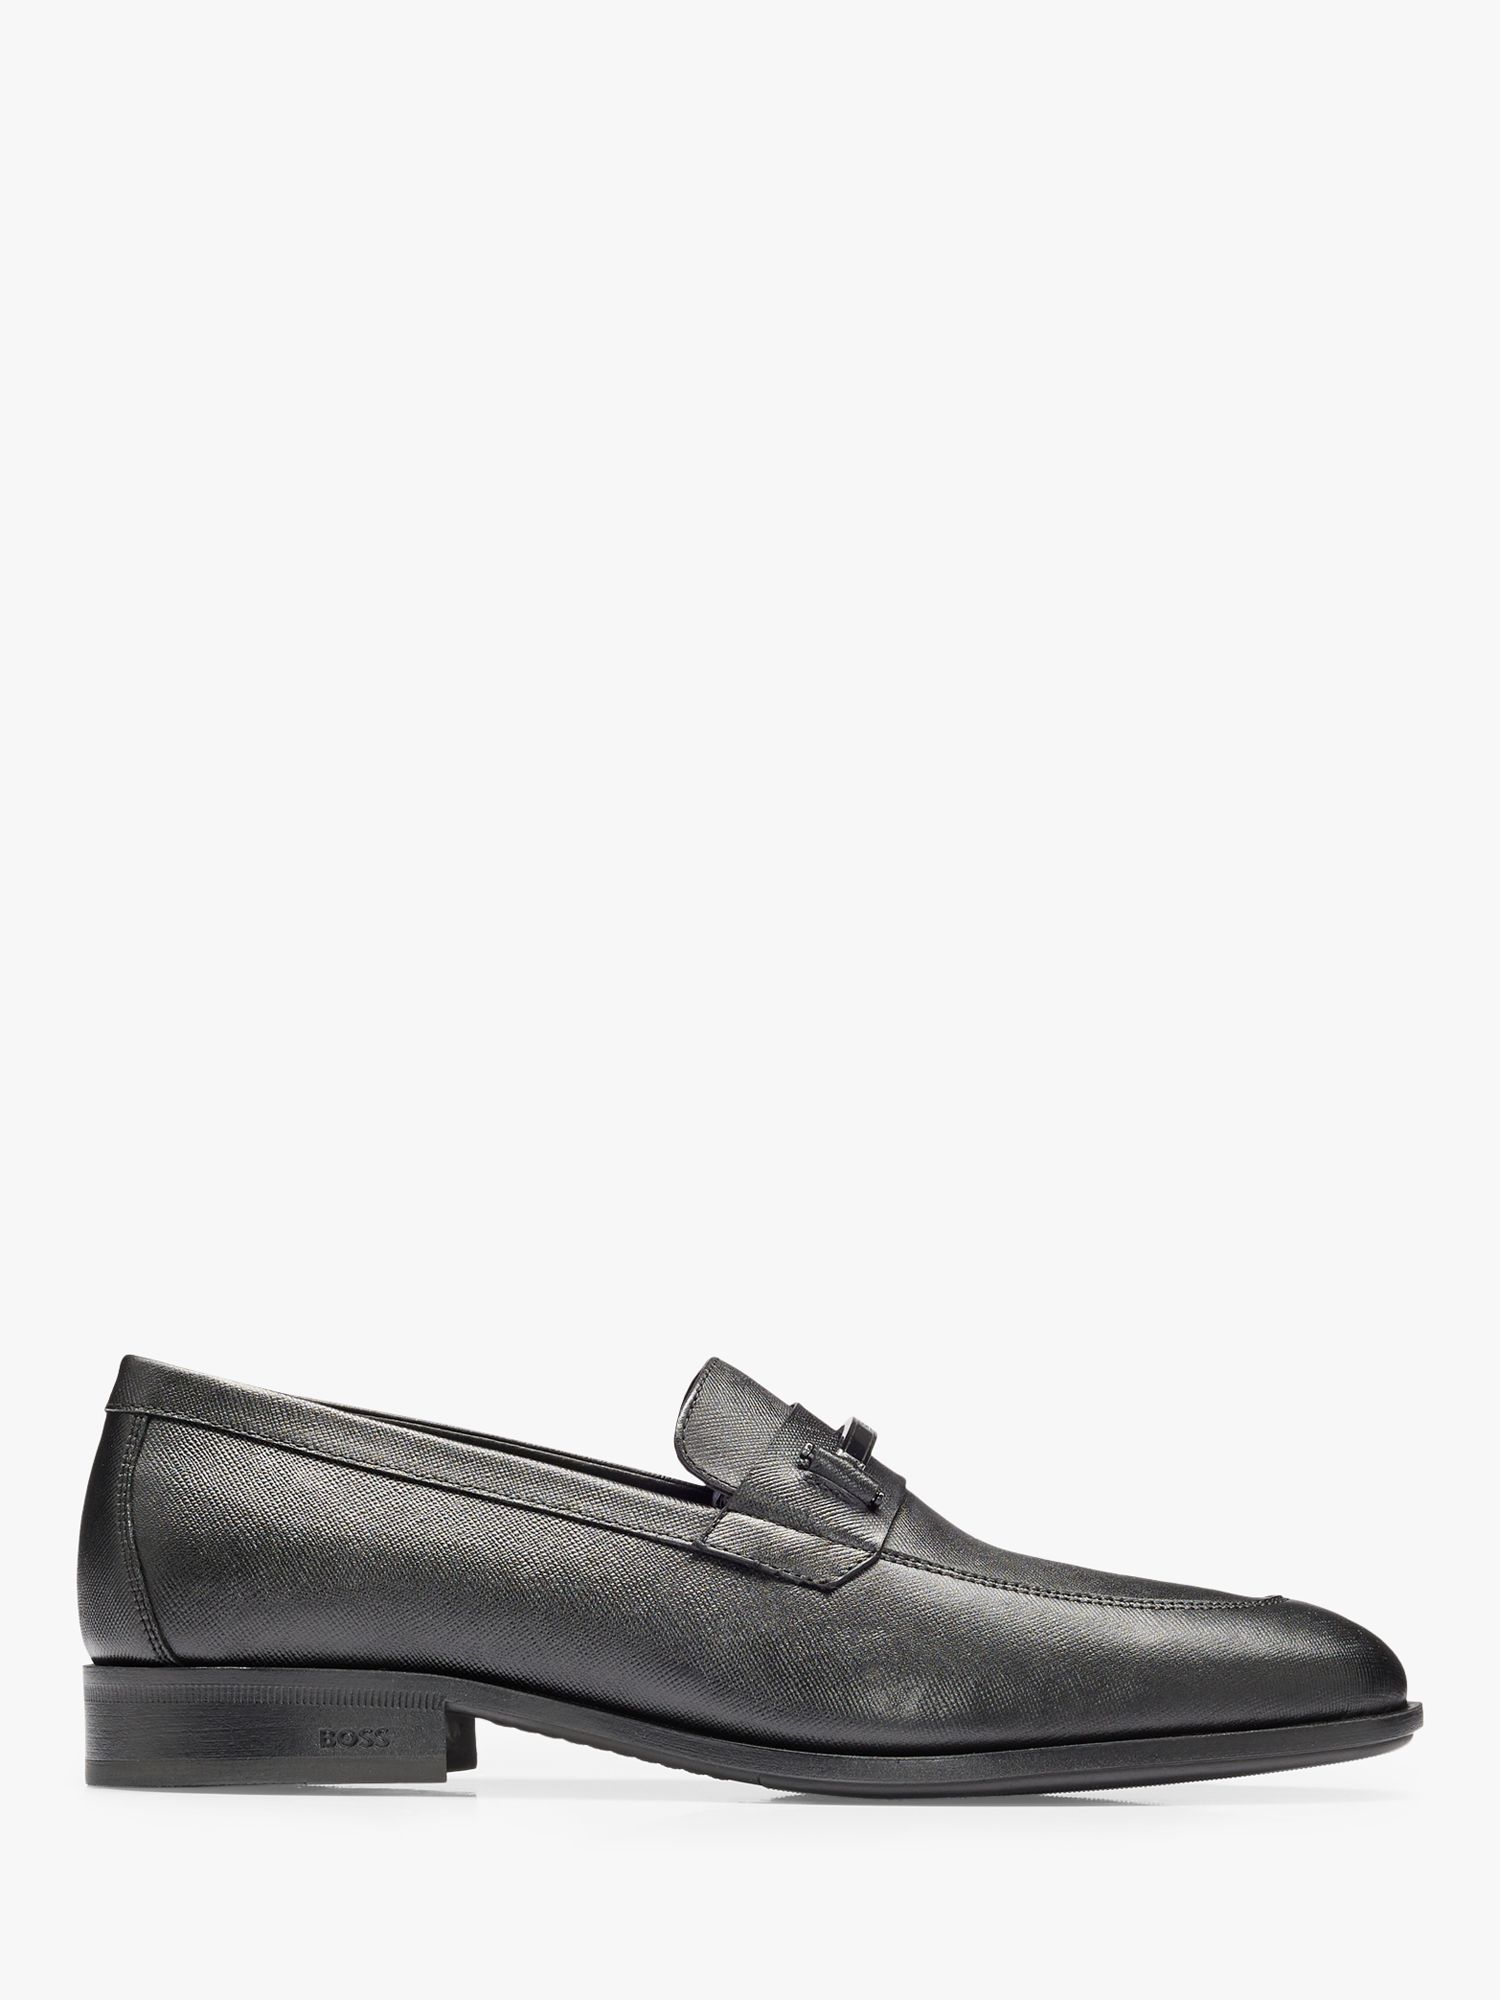 BOSS Colby Loafers, Black, 9